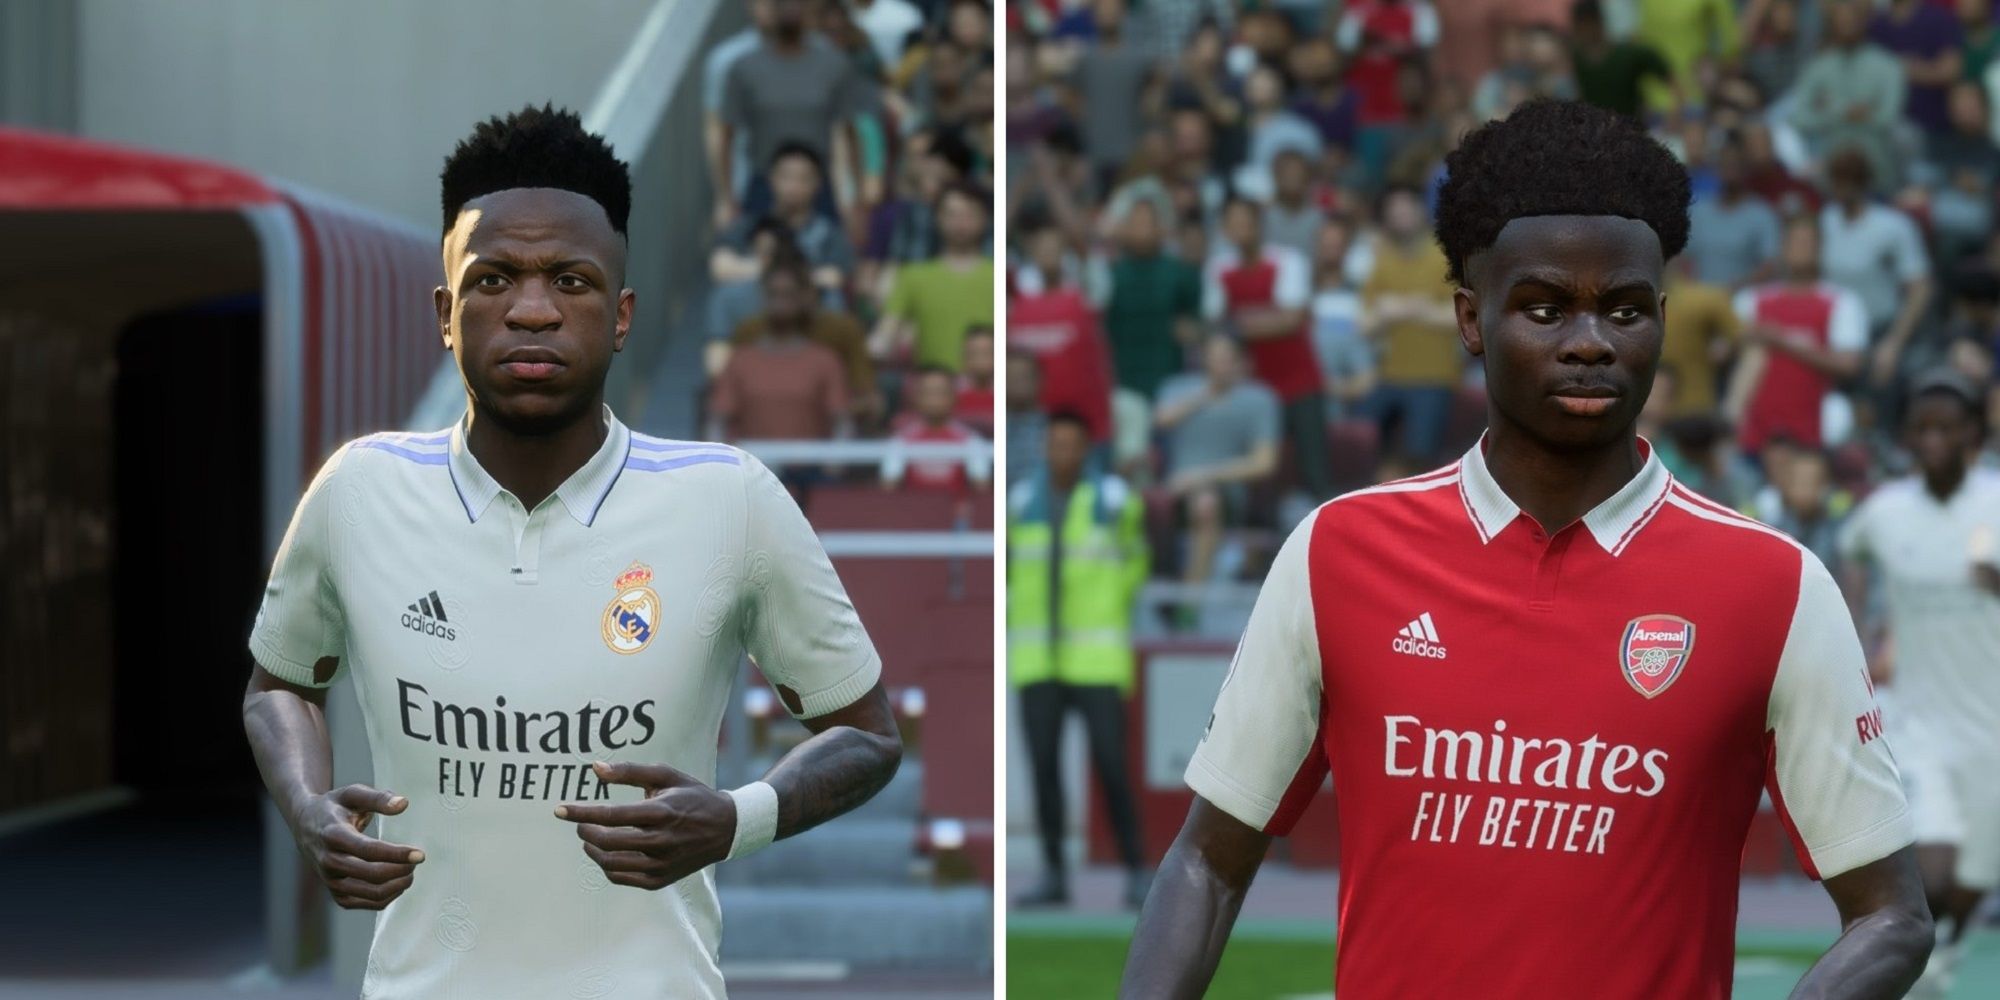 FIFA 23 best young strikers: The top 50 forwards & wingers on Career Mode